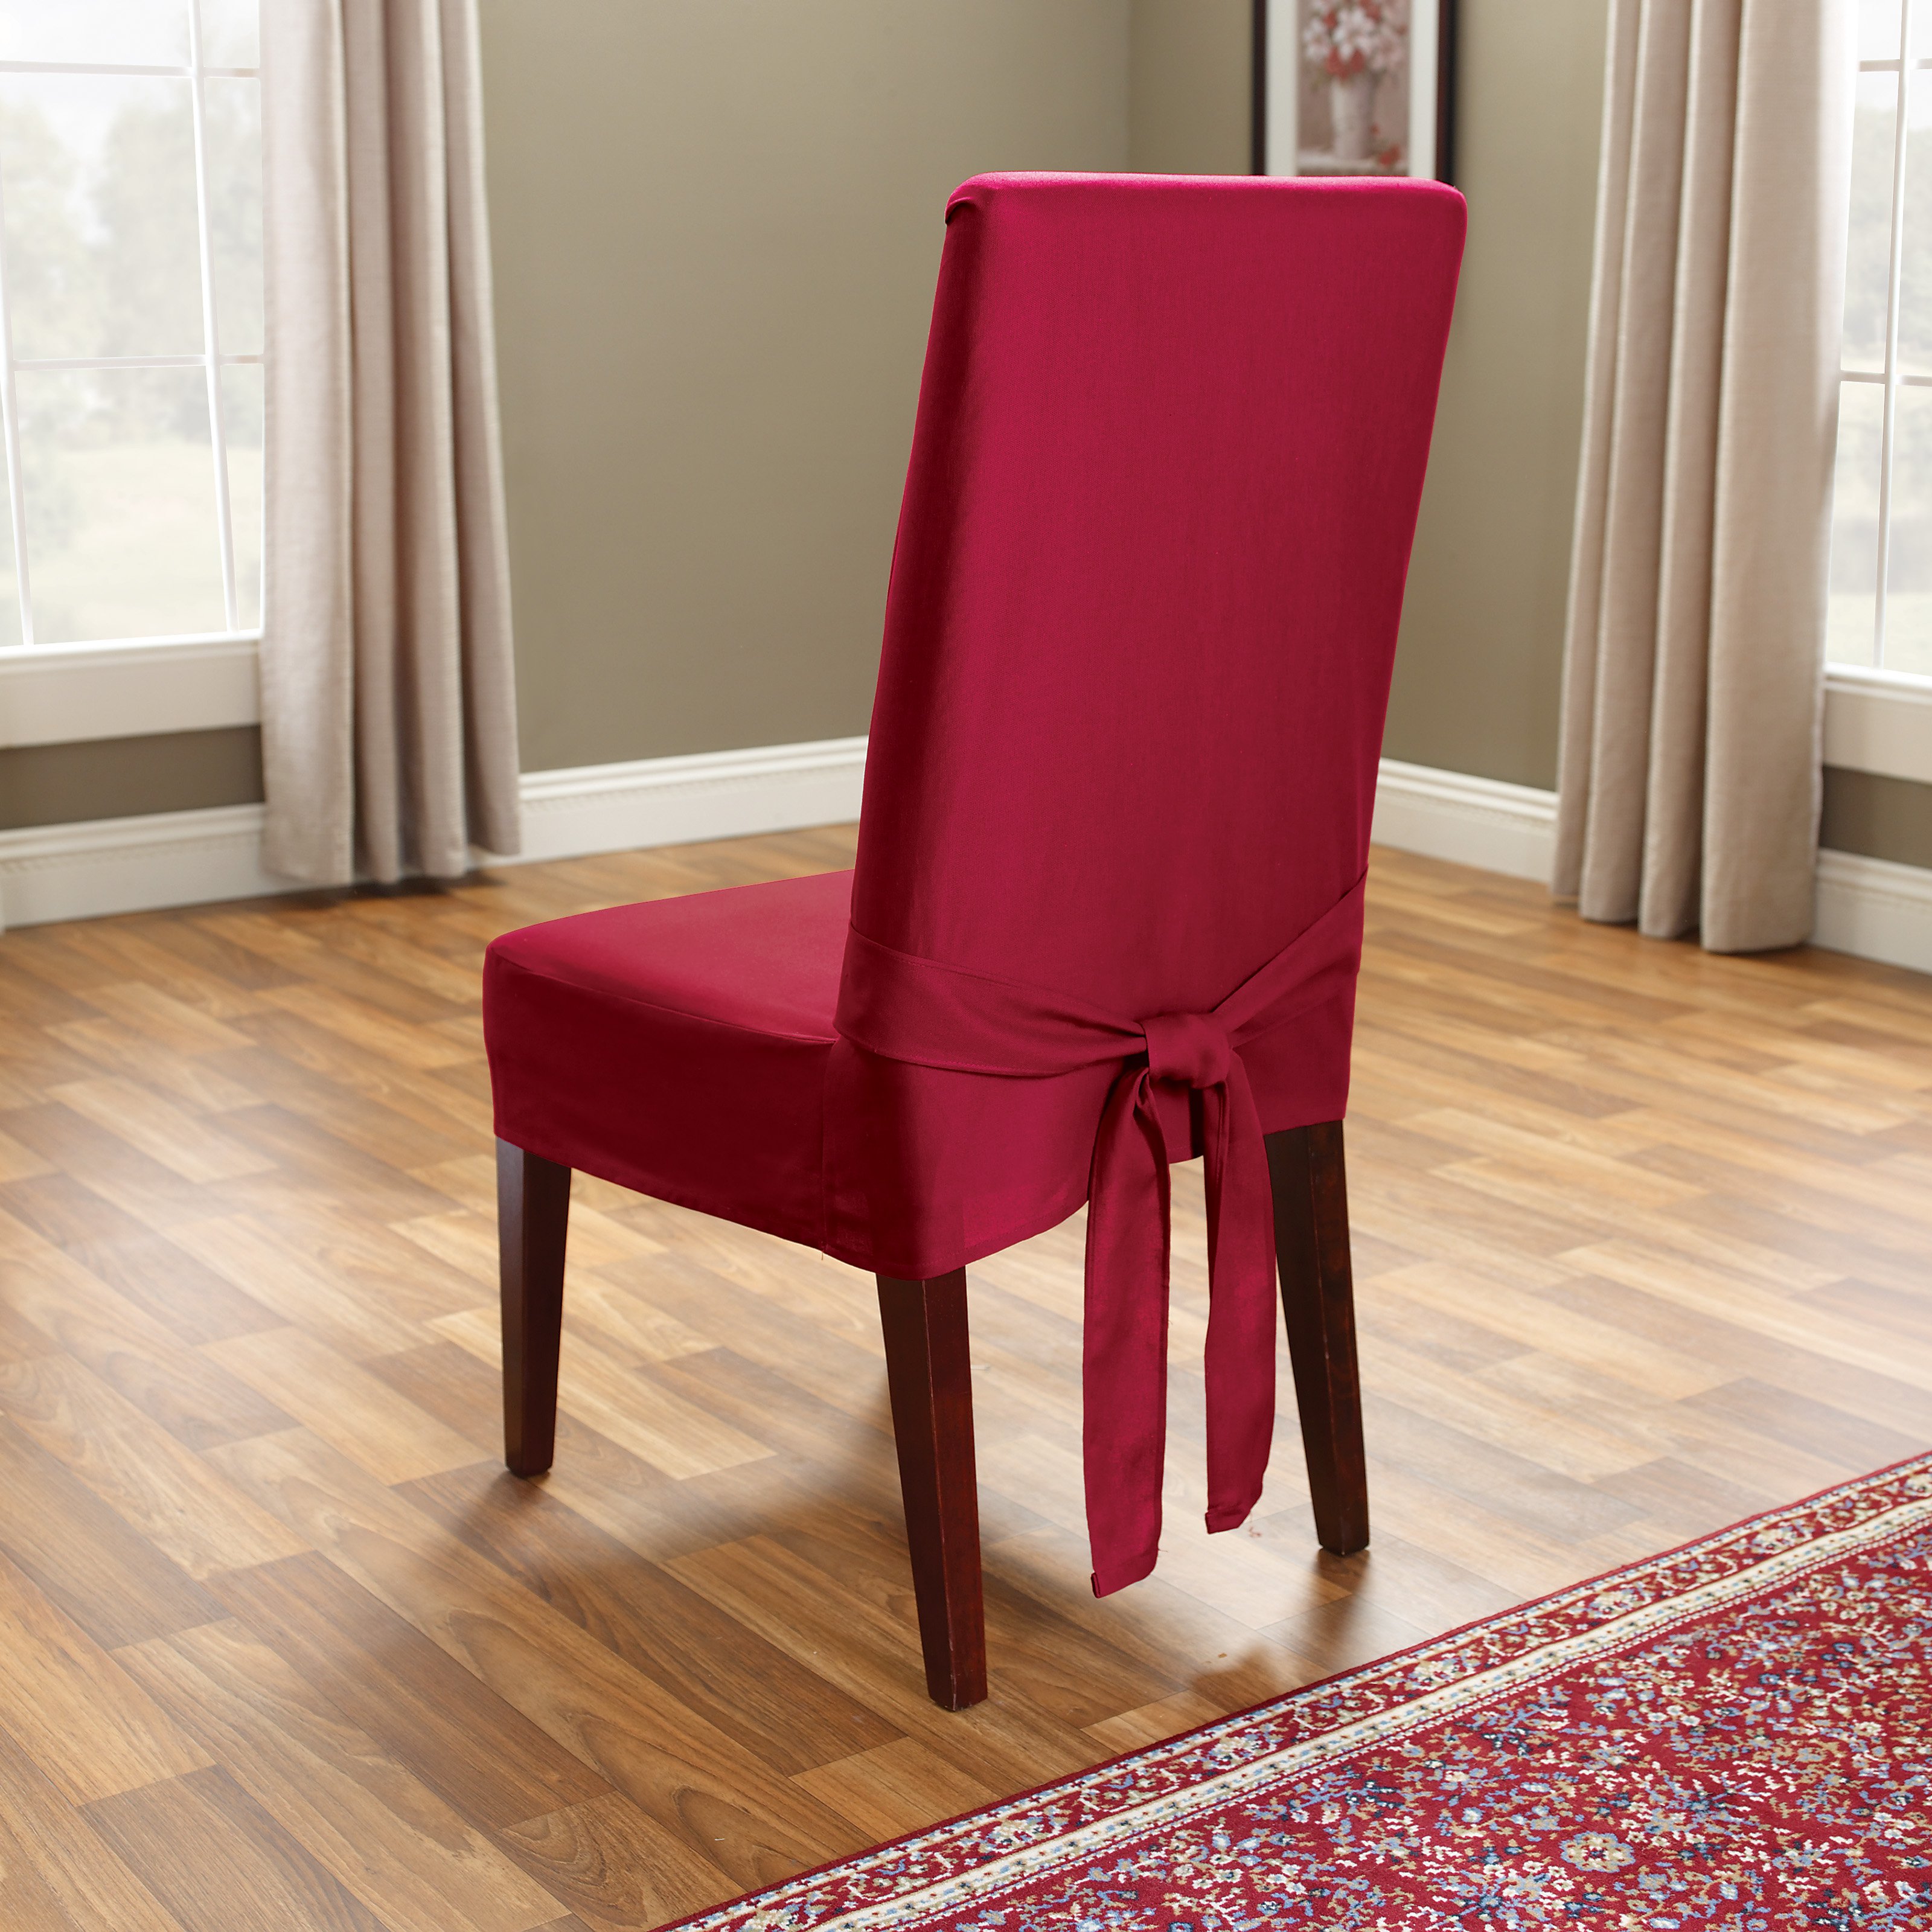 dining room chair seat cover photo - 1